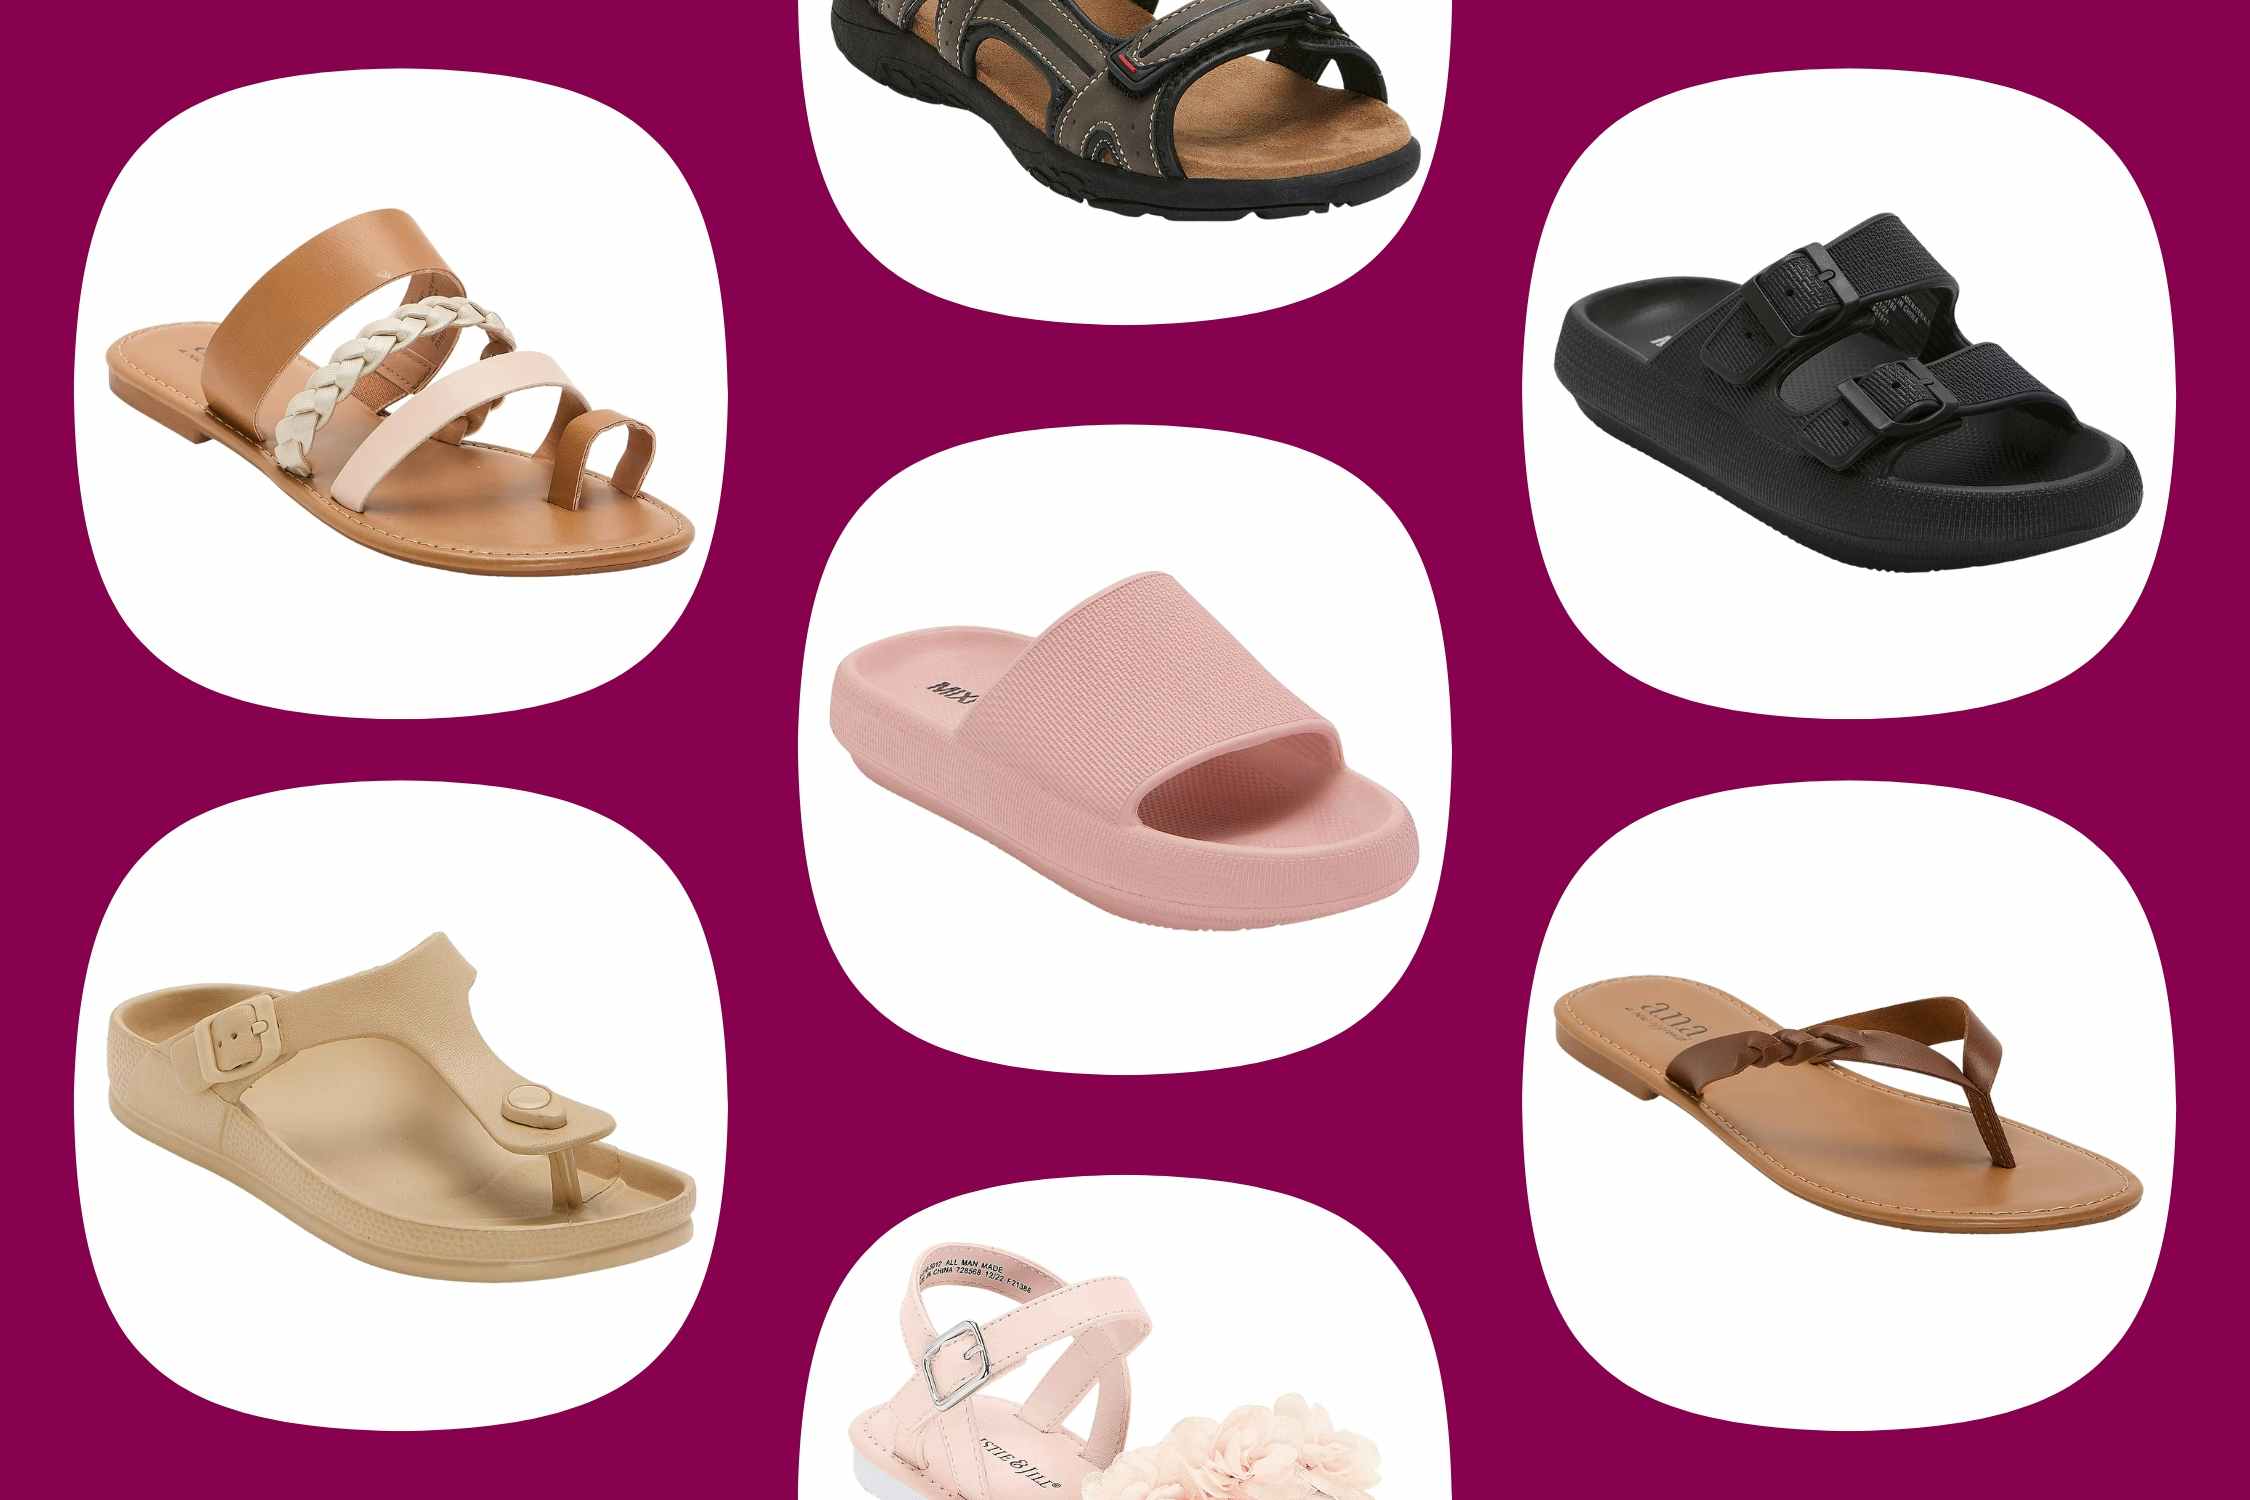 Buy 1 Get 2 Free Sandals Sale at JCPenney — Pay as Low as $6 per Pair